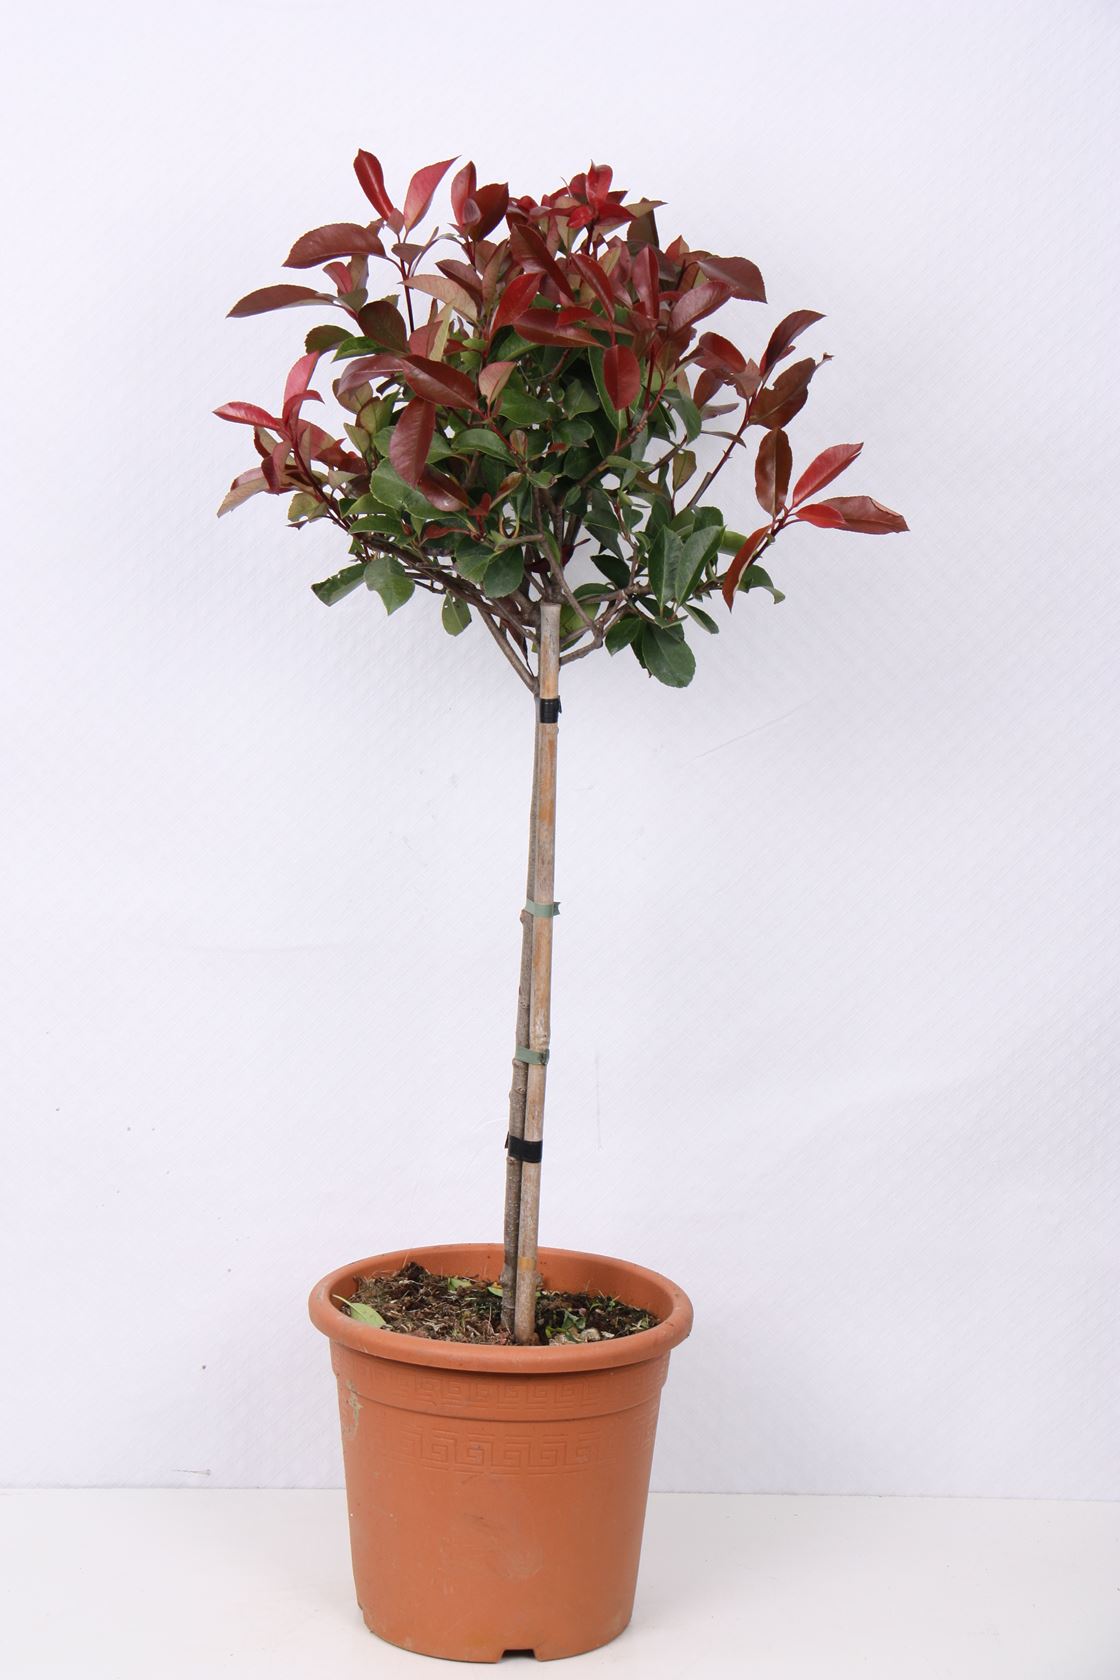 Photinia x fraseri 'Red Robin' - pot 9L - grafted on a stem